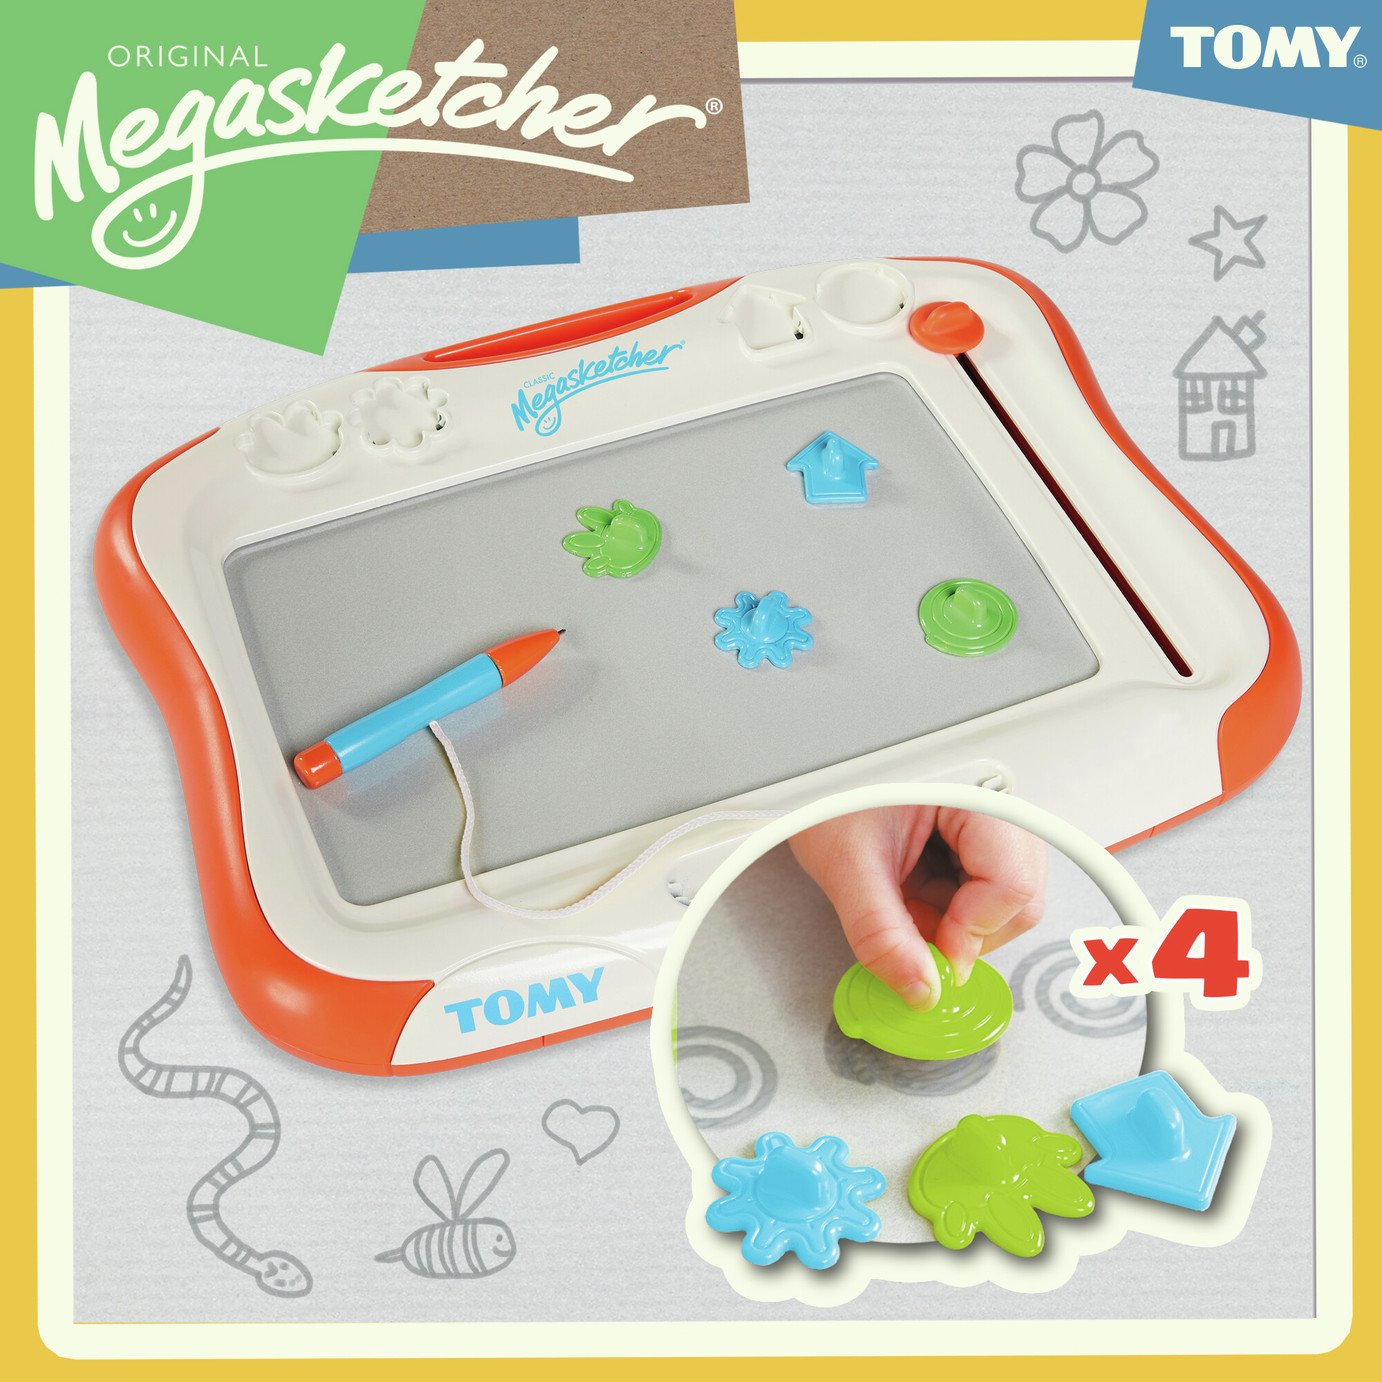 Tomy Megasketcher Review